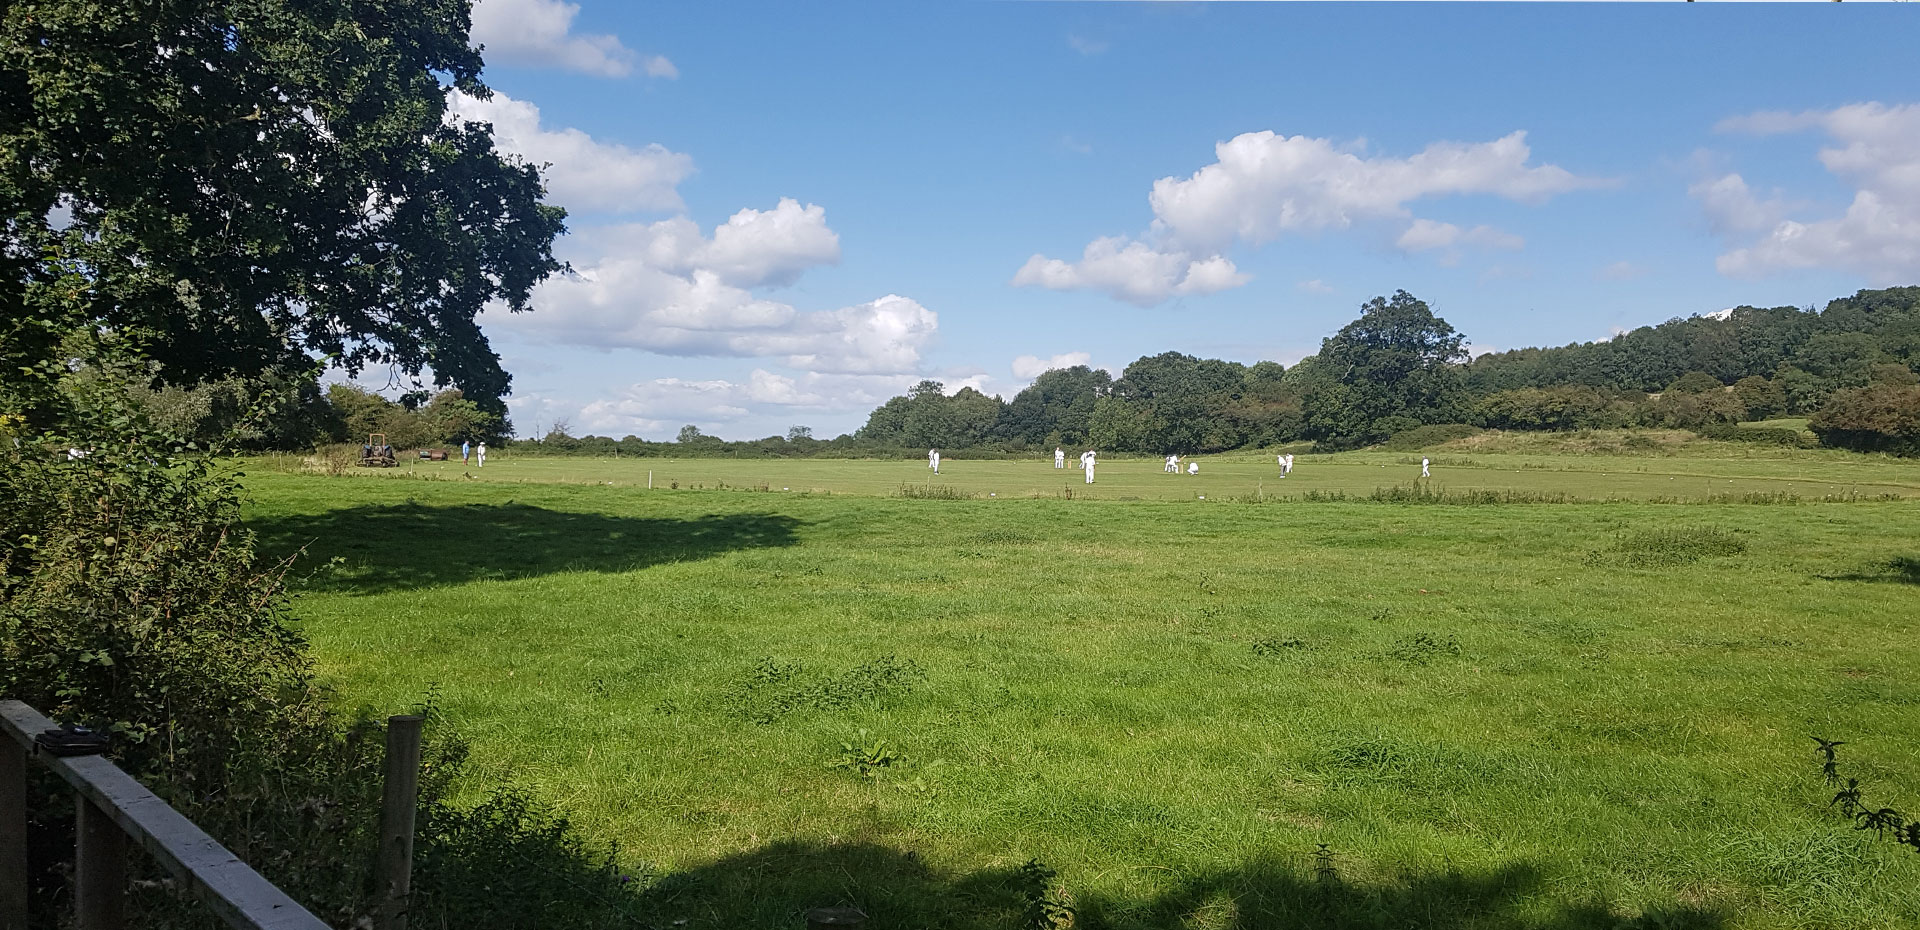 The old cricket pitch at Compton Bassett